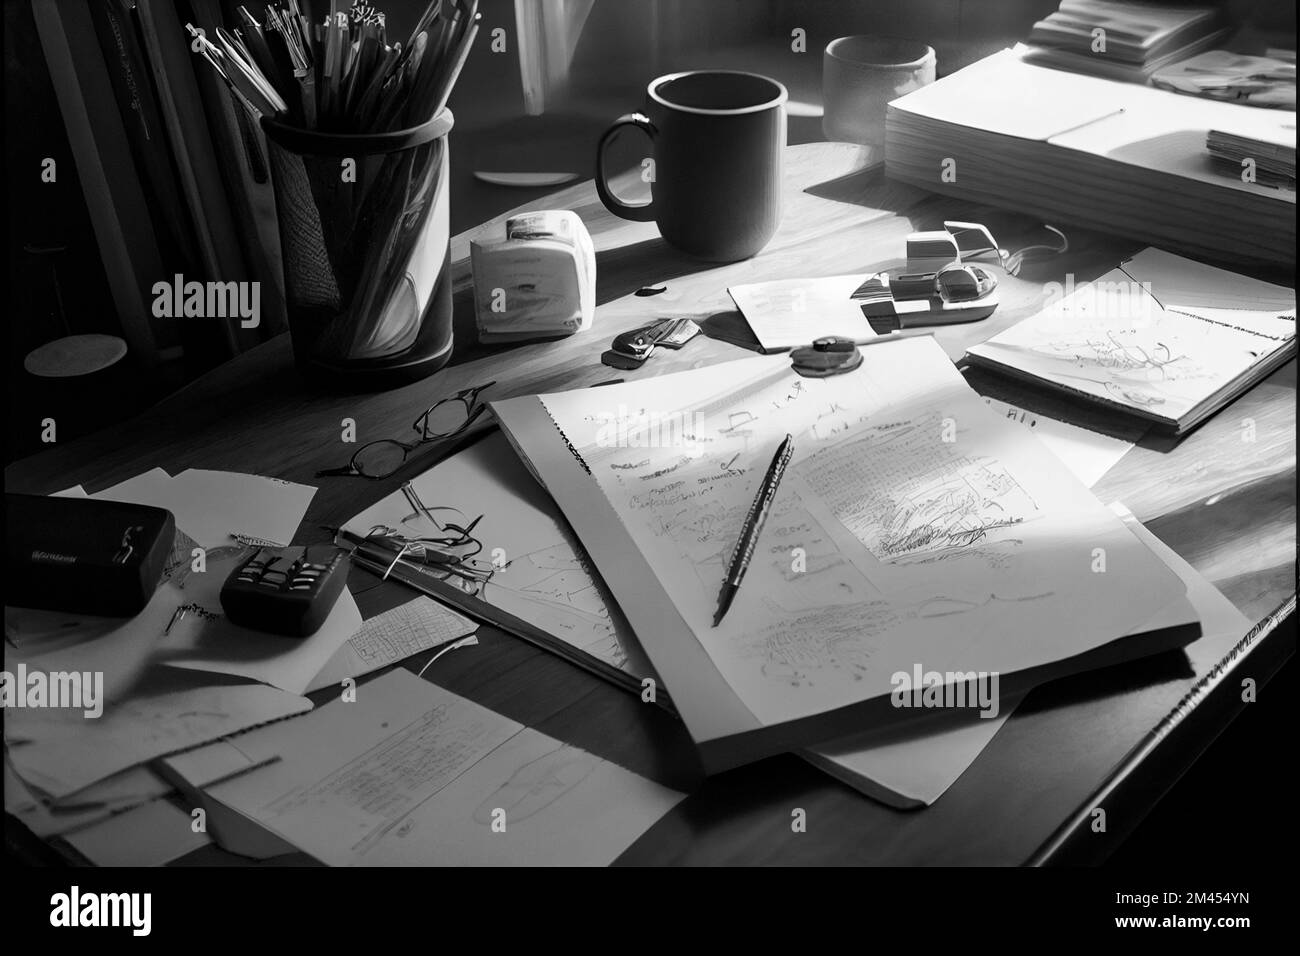 A cluttered desk with pens, papers, and other planning materials scattered around. The scene conveys a sense of productivity and organization as the i Stock Photo